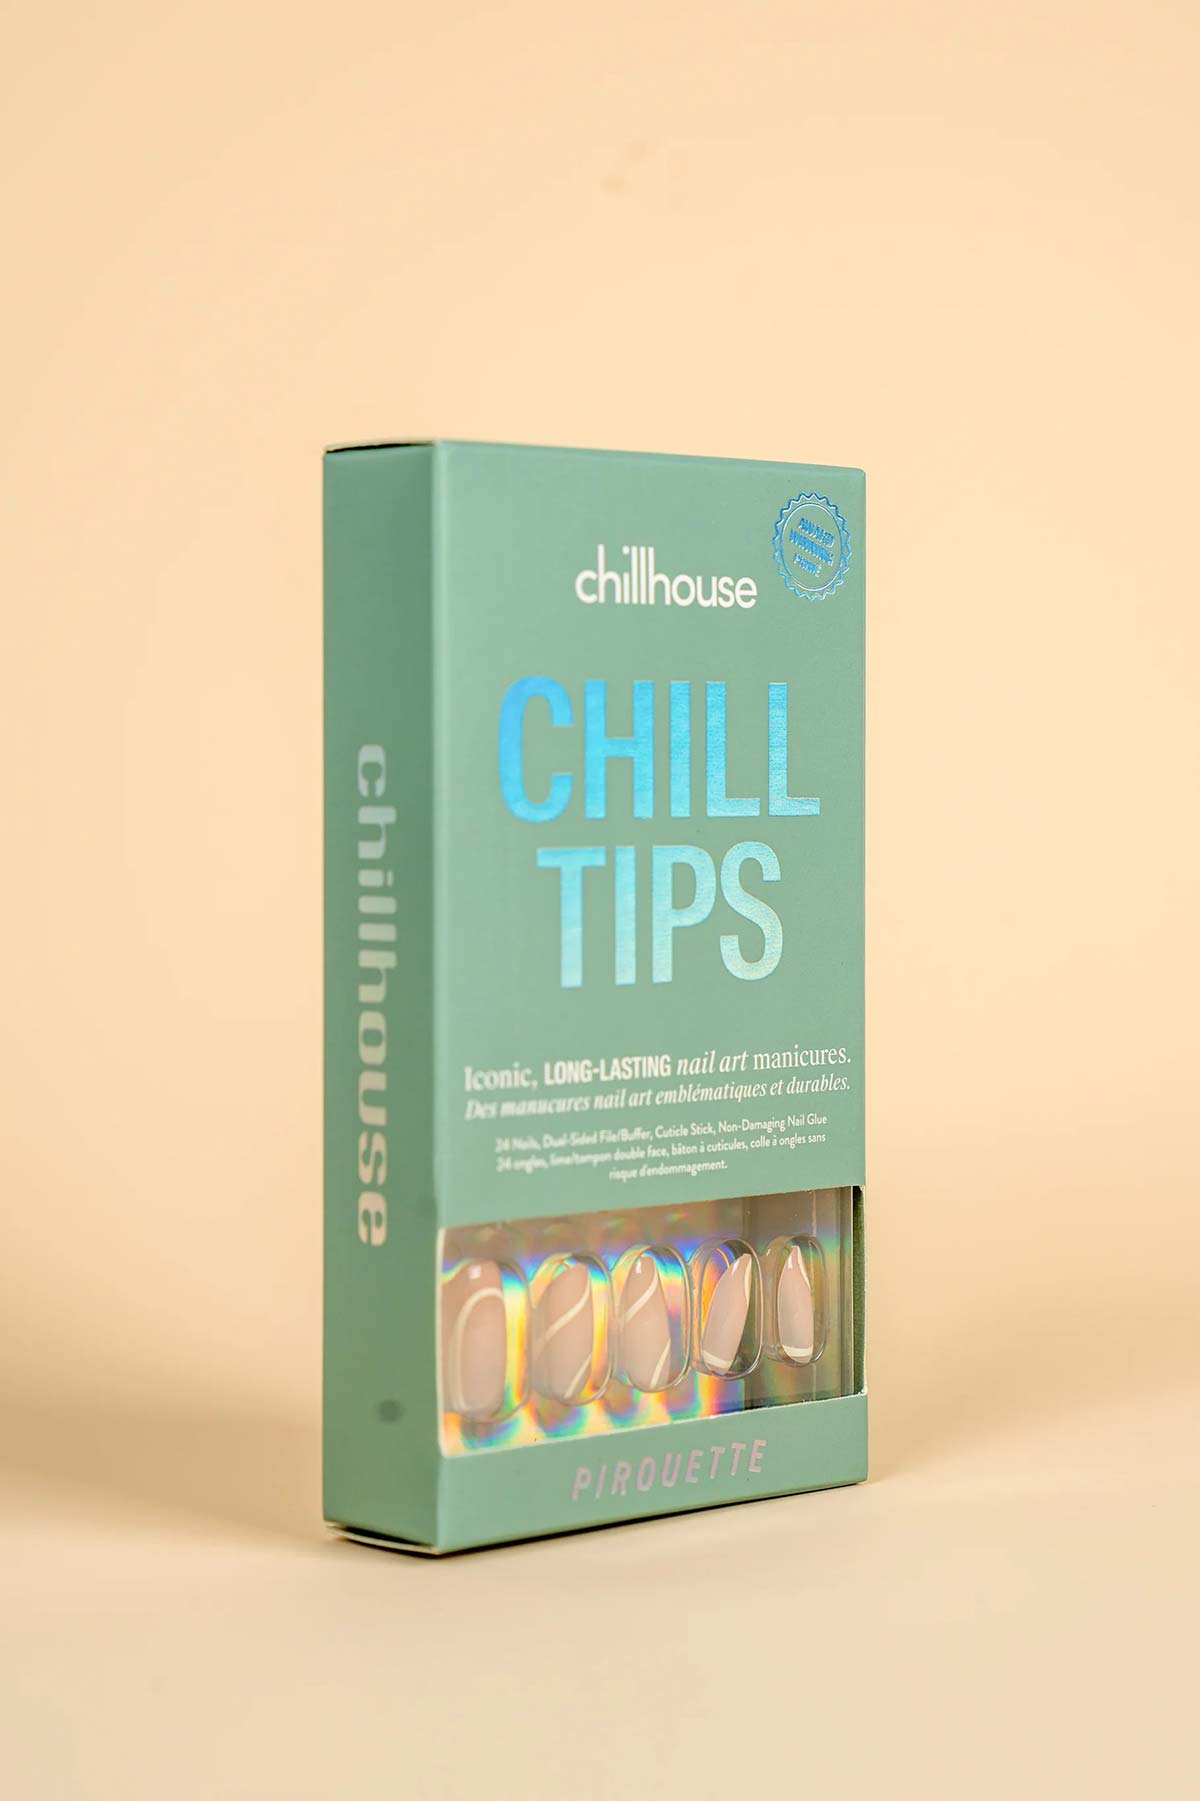 Chillhouse - Chill Tips - Pirouette - Package